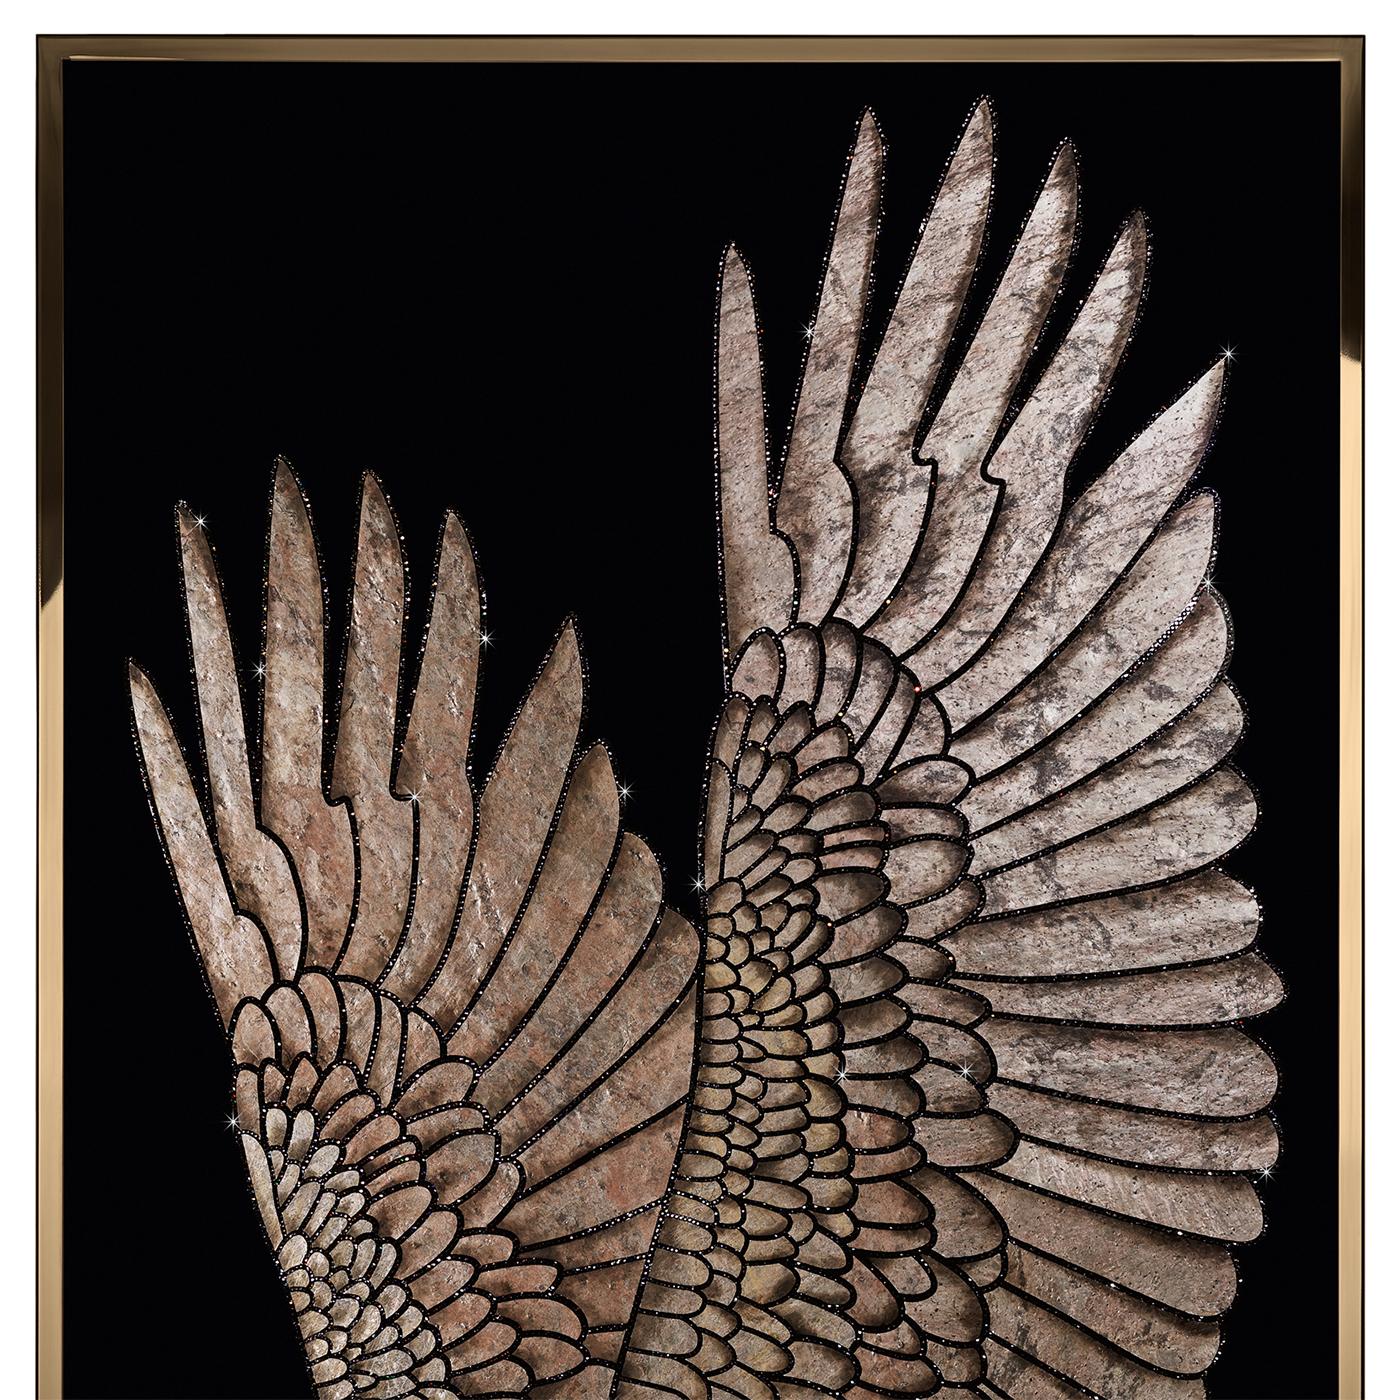 Wall decoration wings with plexiglass background with integrated
natural stone decorations ornamented with carved graphite crystals.
With polished stainless steel frame. Exceptional piece, each piece is
unique.